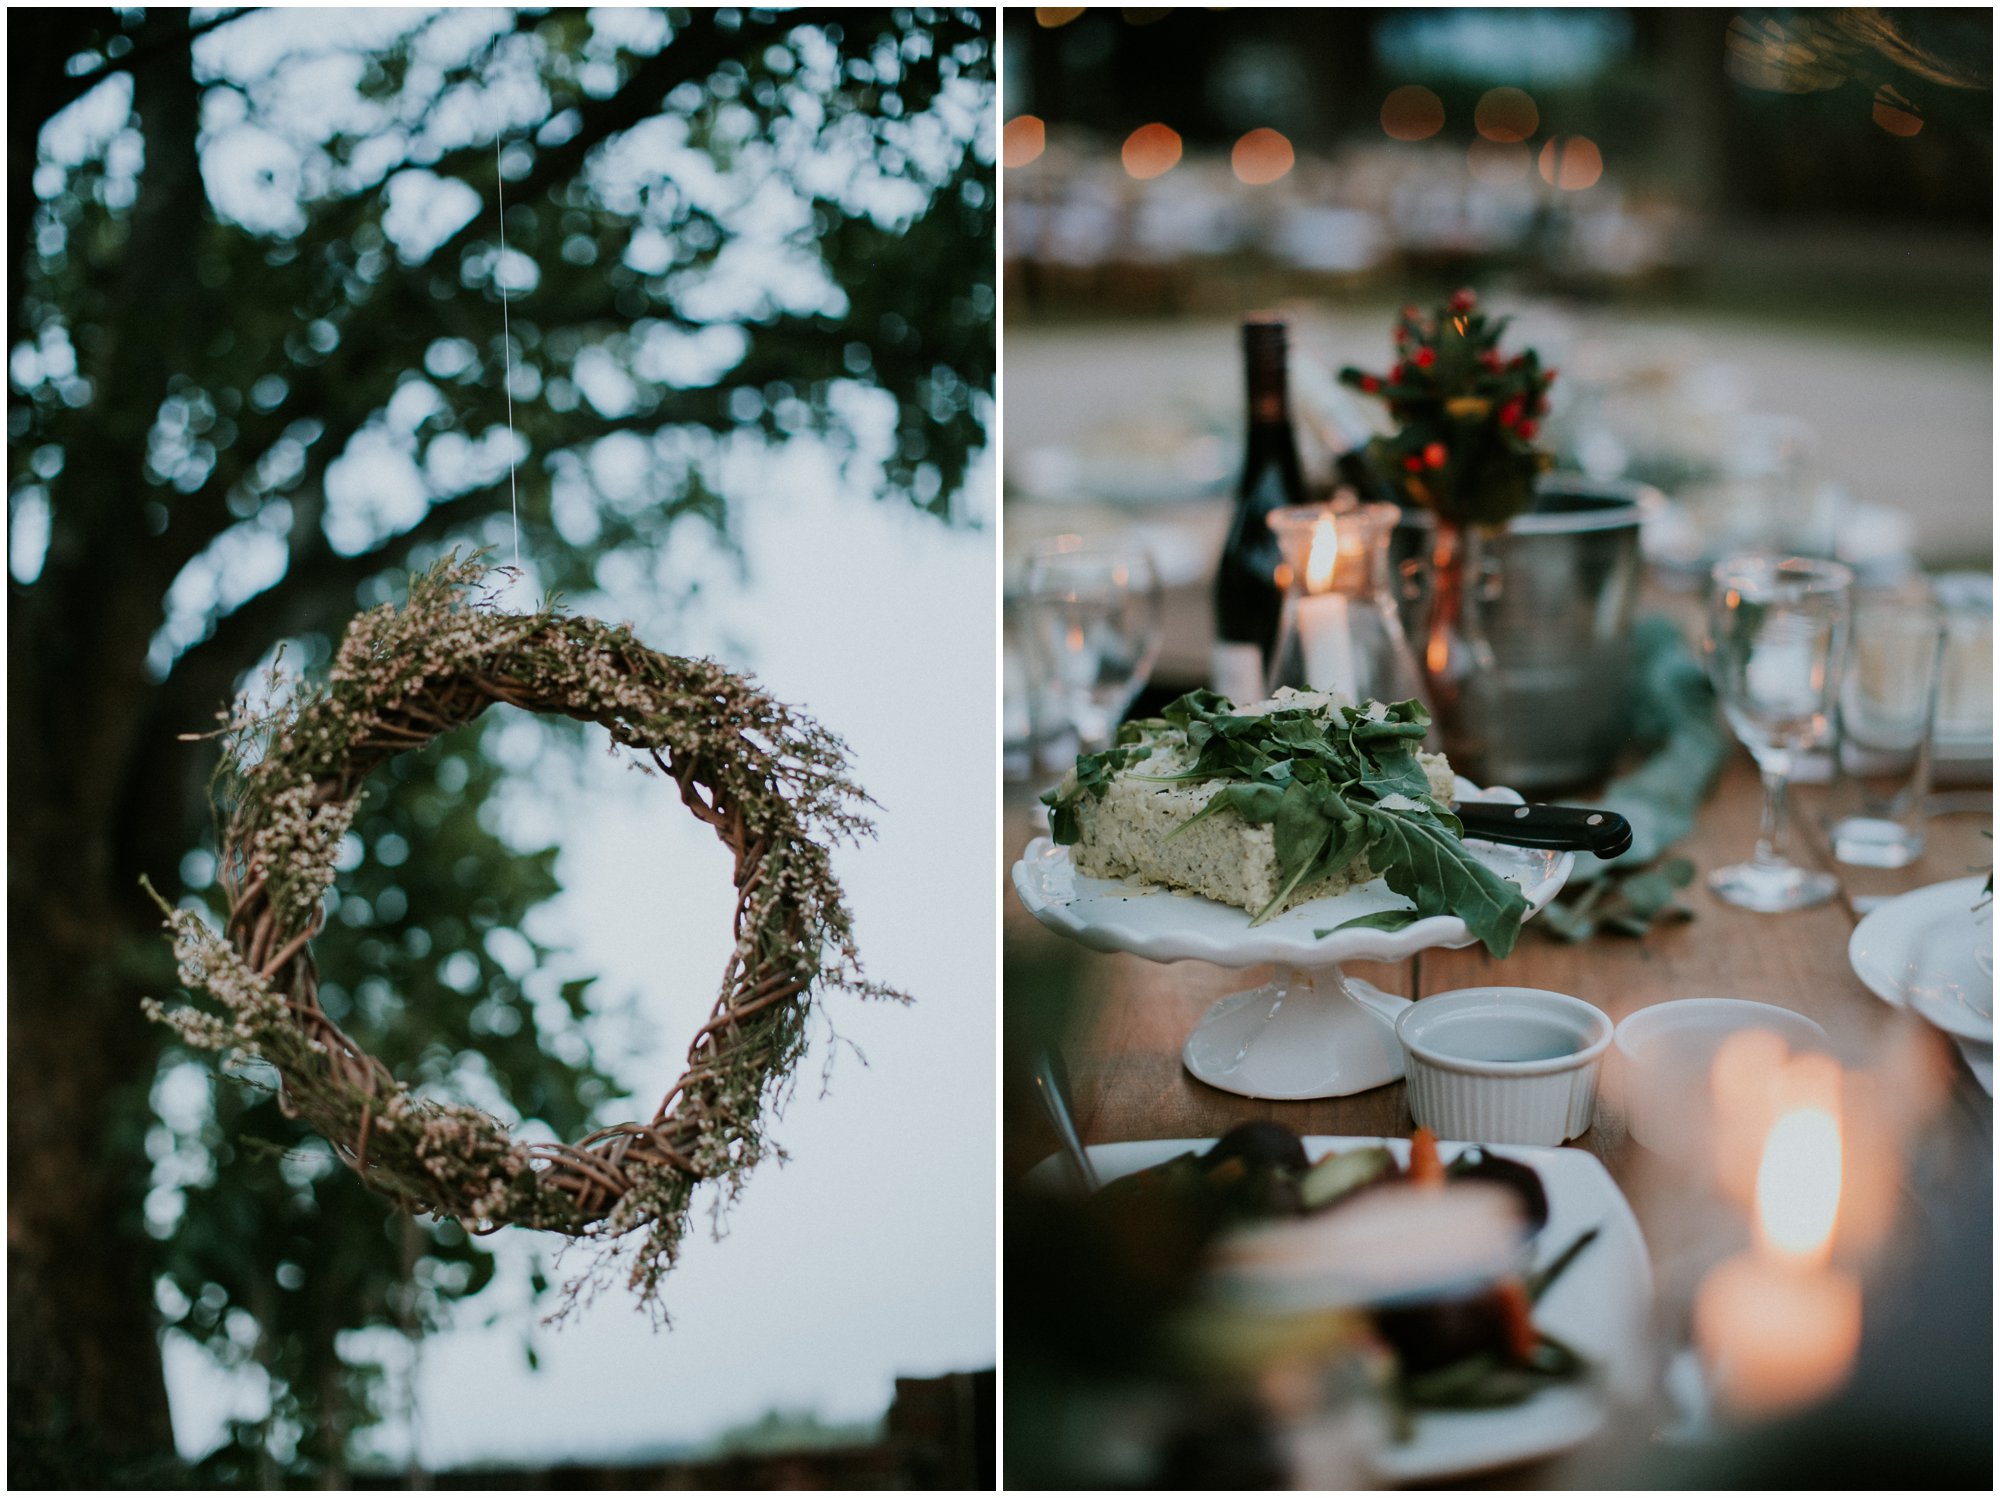 Decor for Outdoor Bohemian Destination Wedding at Francine’s Venue in Hoedspruit Limpopo by Junebug World's Best Photographer Maryke Albertyn Award Winning International Alternative Moody Photography based in Cape Town South Africa